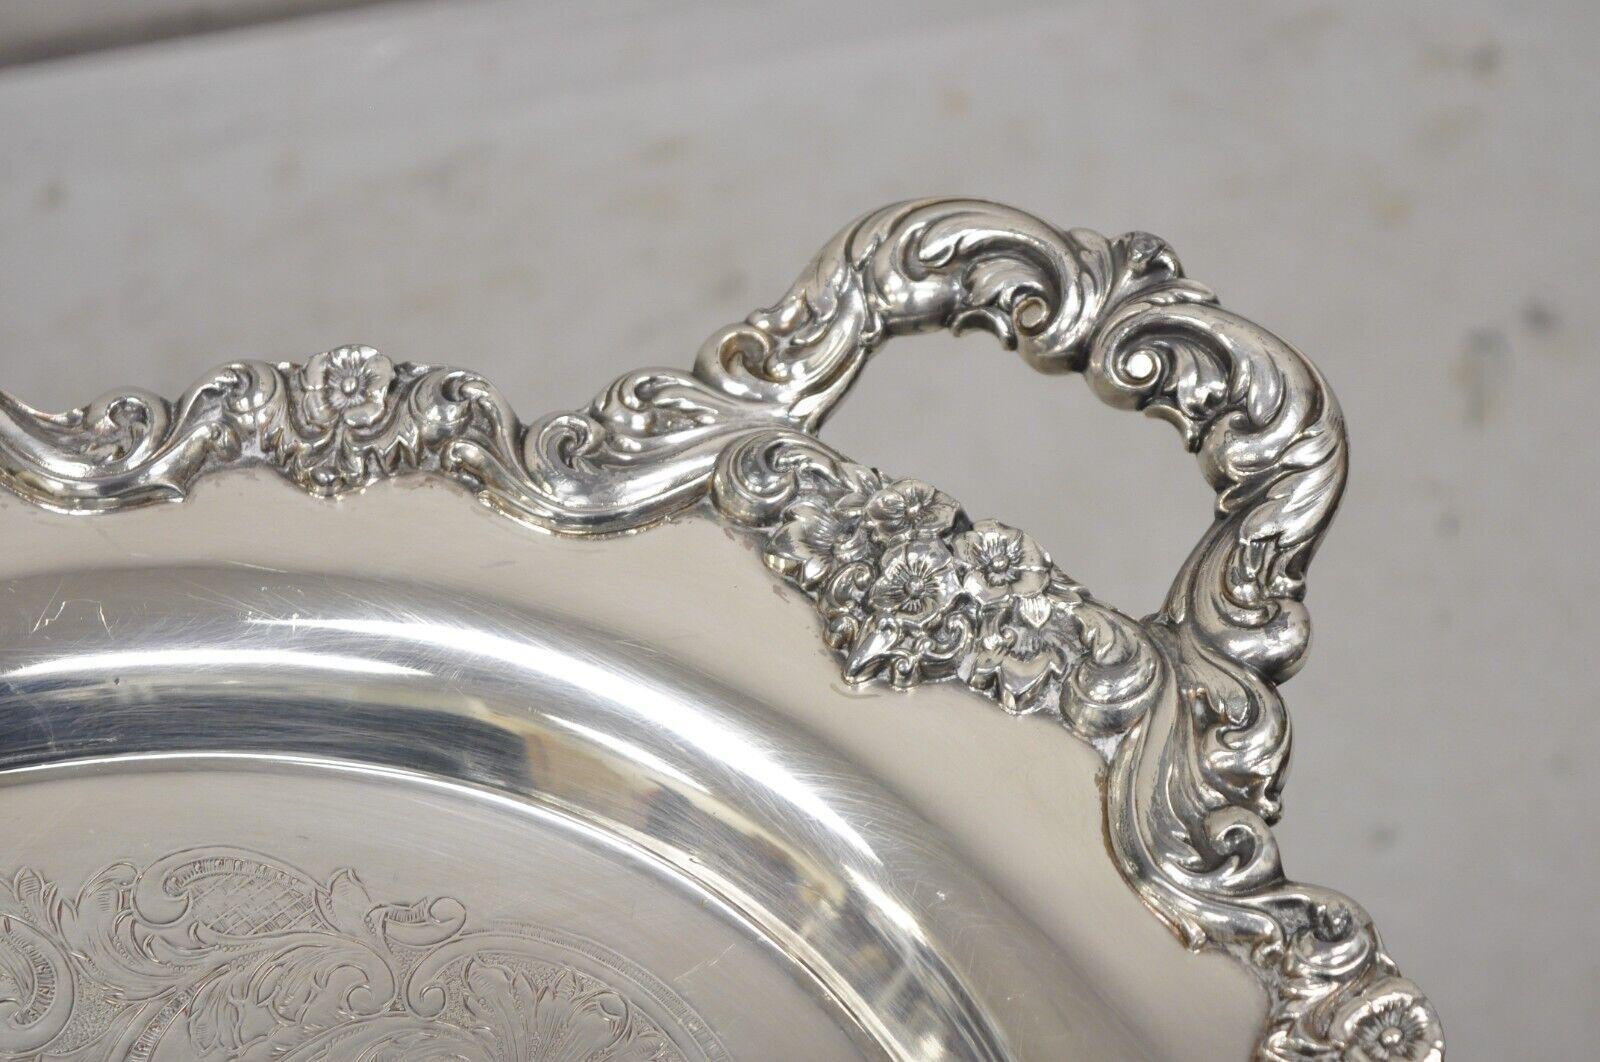 EPCA Poole Silver Co 400 Lancaster Rose Lrg Silver Plate Serving Platter Tray B For Sale 2